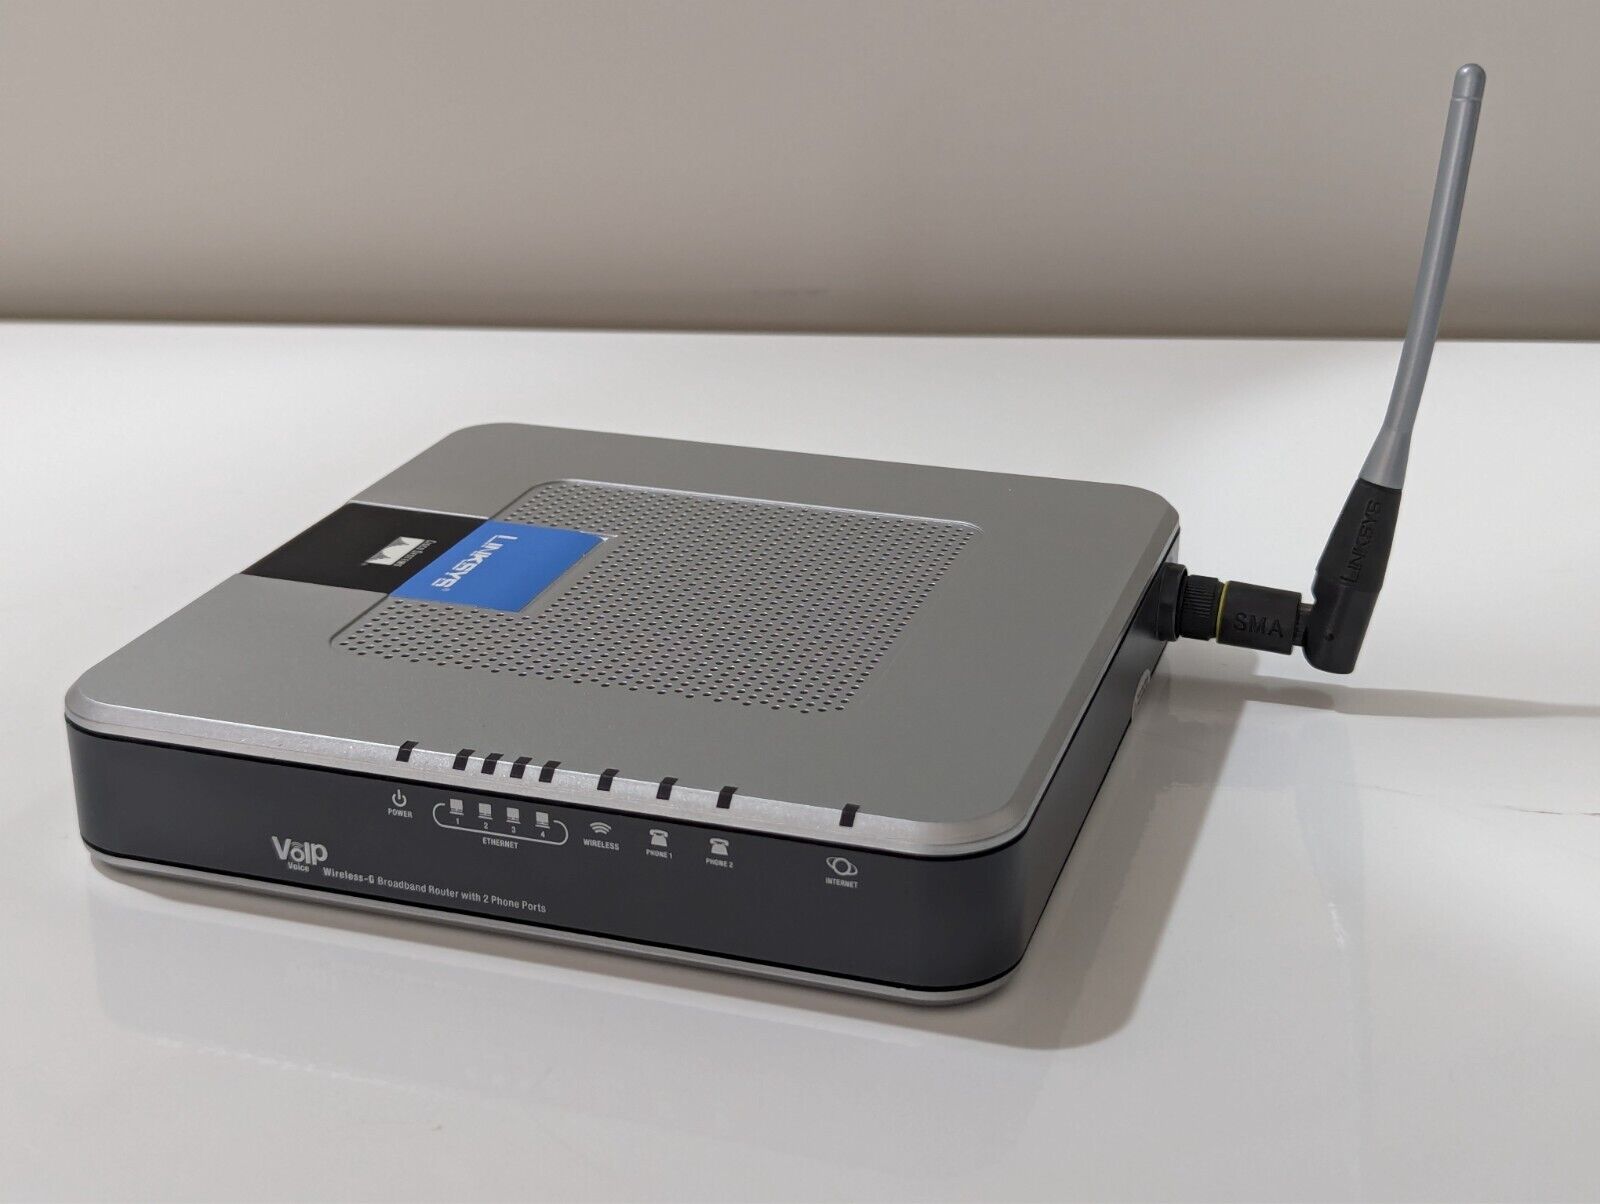 Linksys WRTP54G 3 Mbps 4-Port 10/100 Wireless G Router